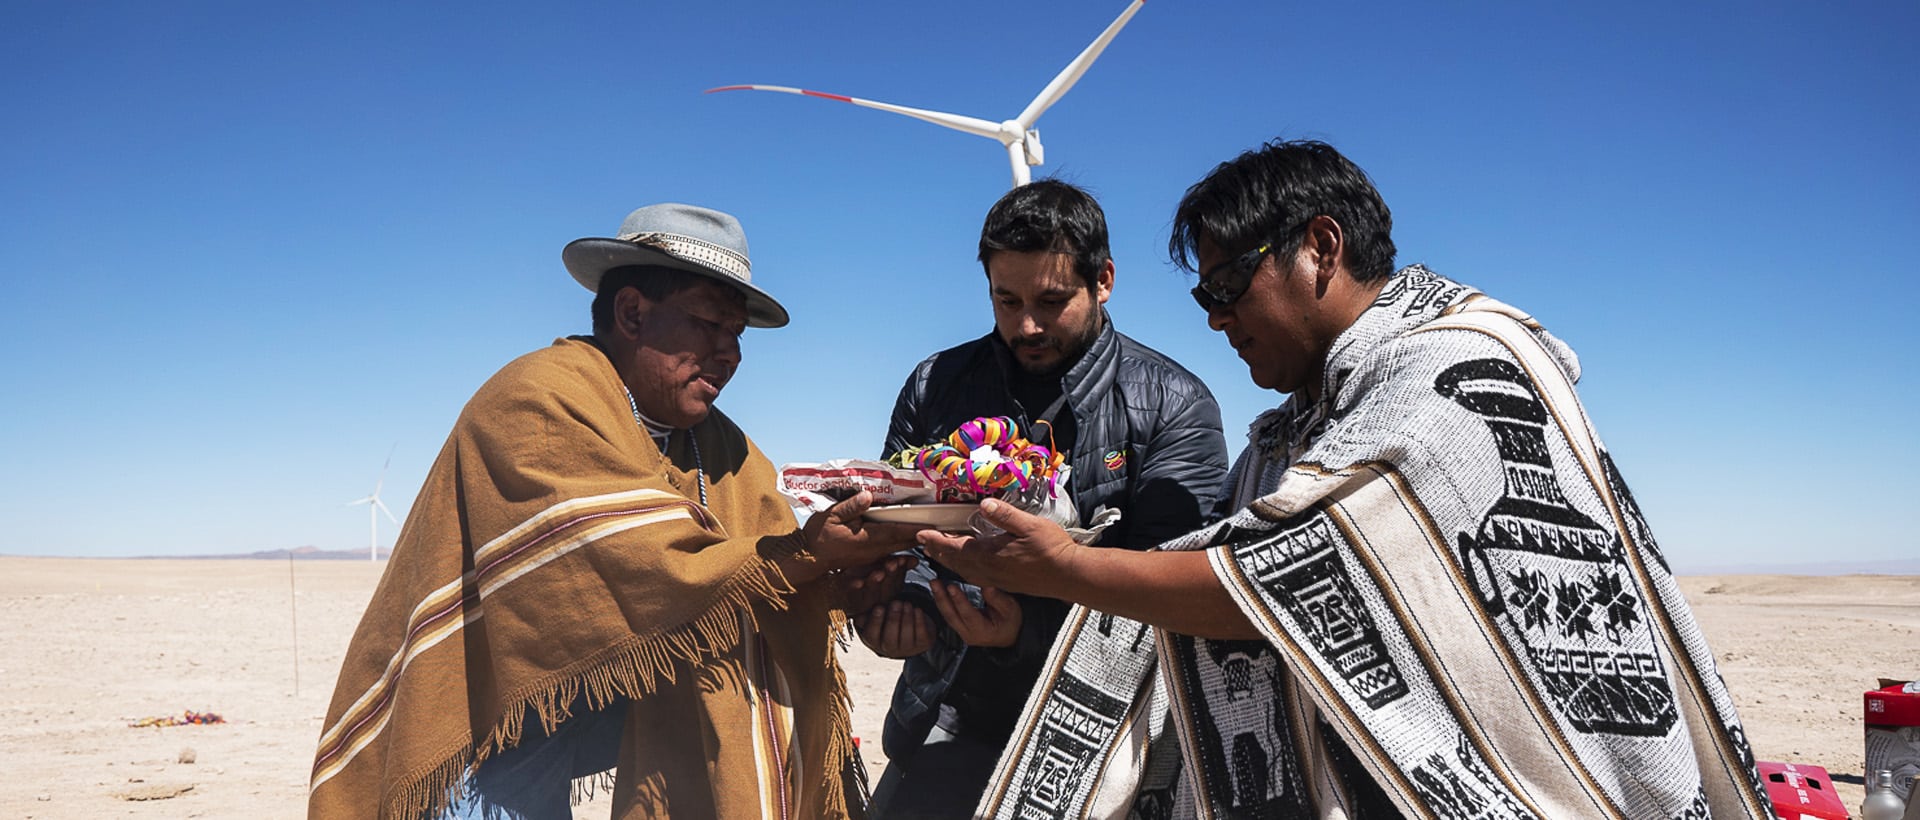 Ancient indigenous rite being performed at Mainstream wind farm